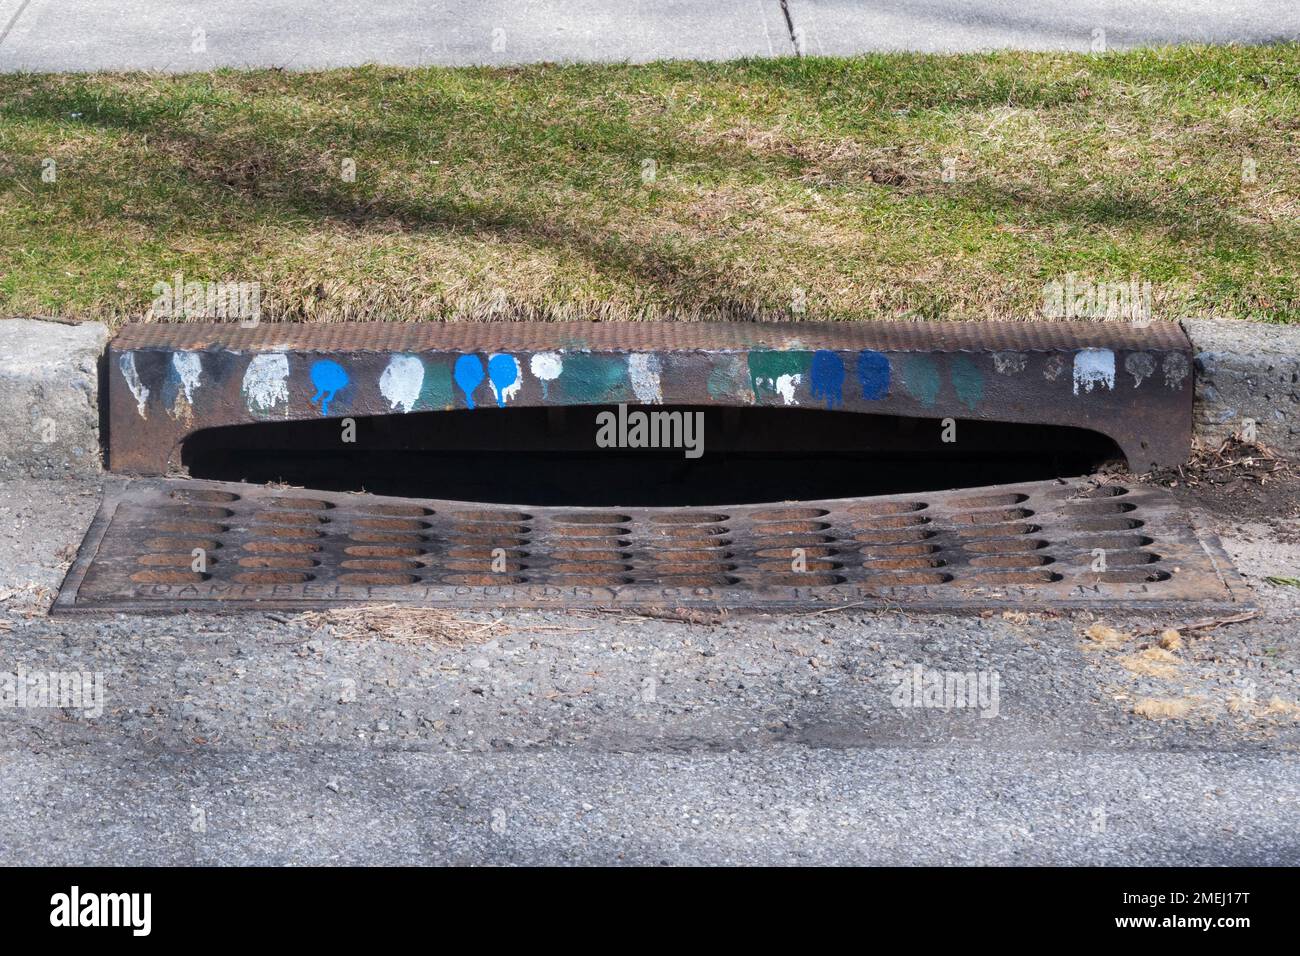 A New York City sewer drain with mysterious markings which in fact indicate the larvicides sprayed to limit the mosquito problem. In Queens, New York. Stock Photo